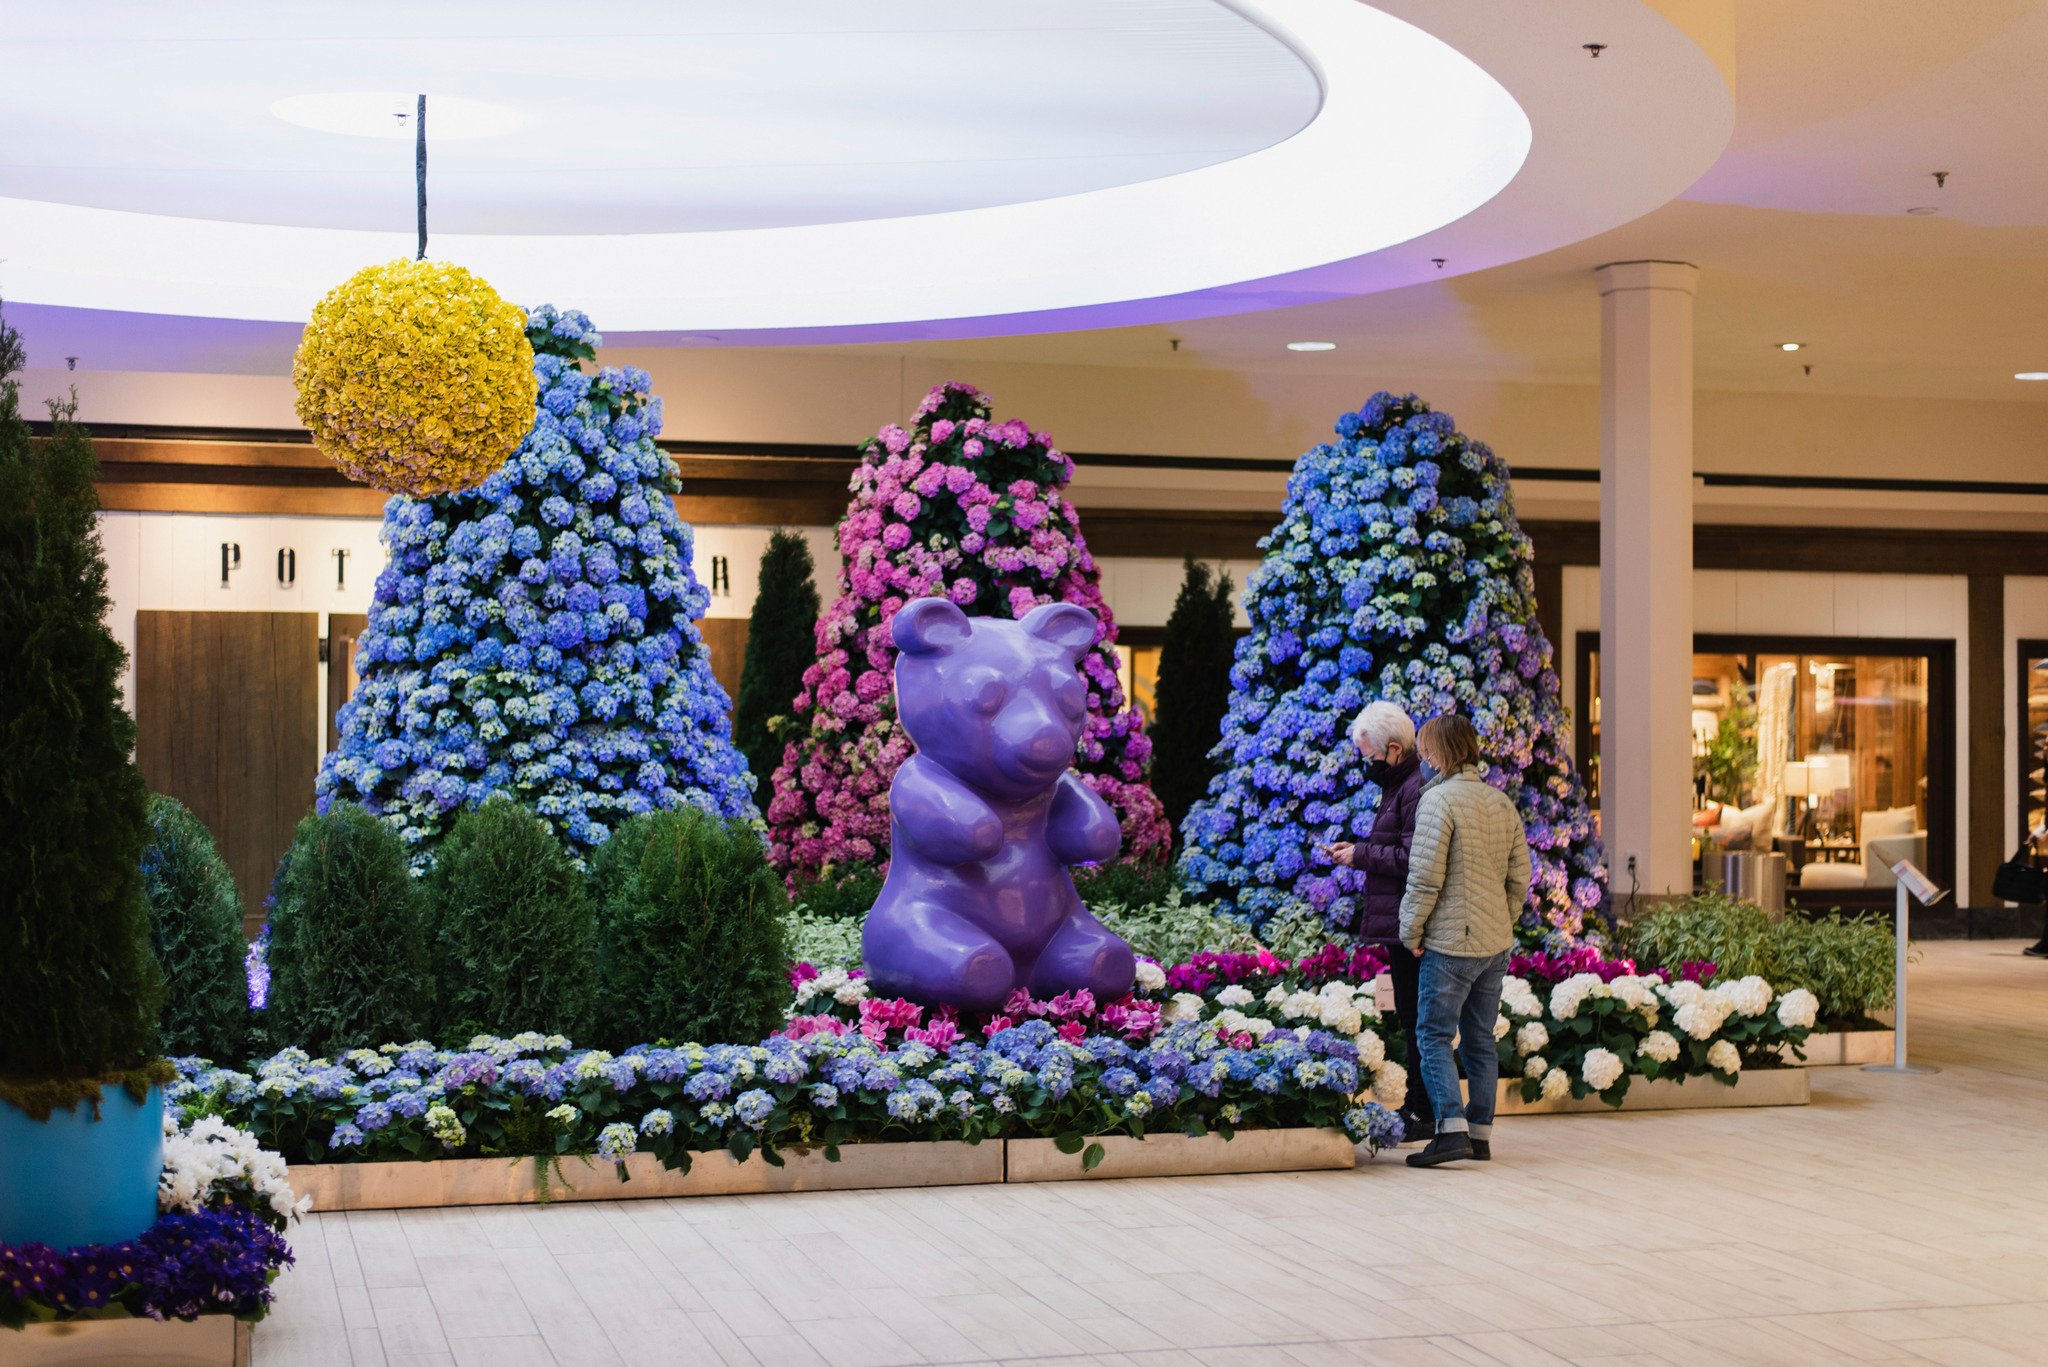 galleria spring flower show to your twin cities spring break list